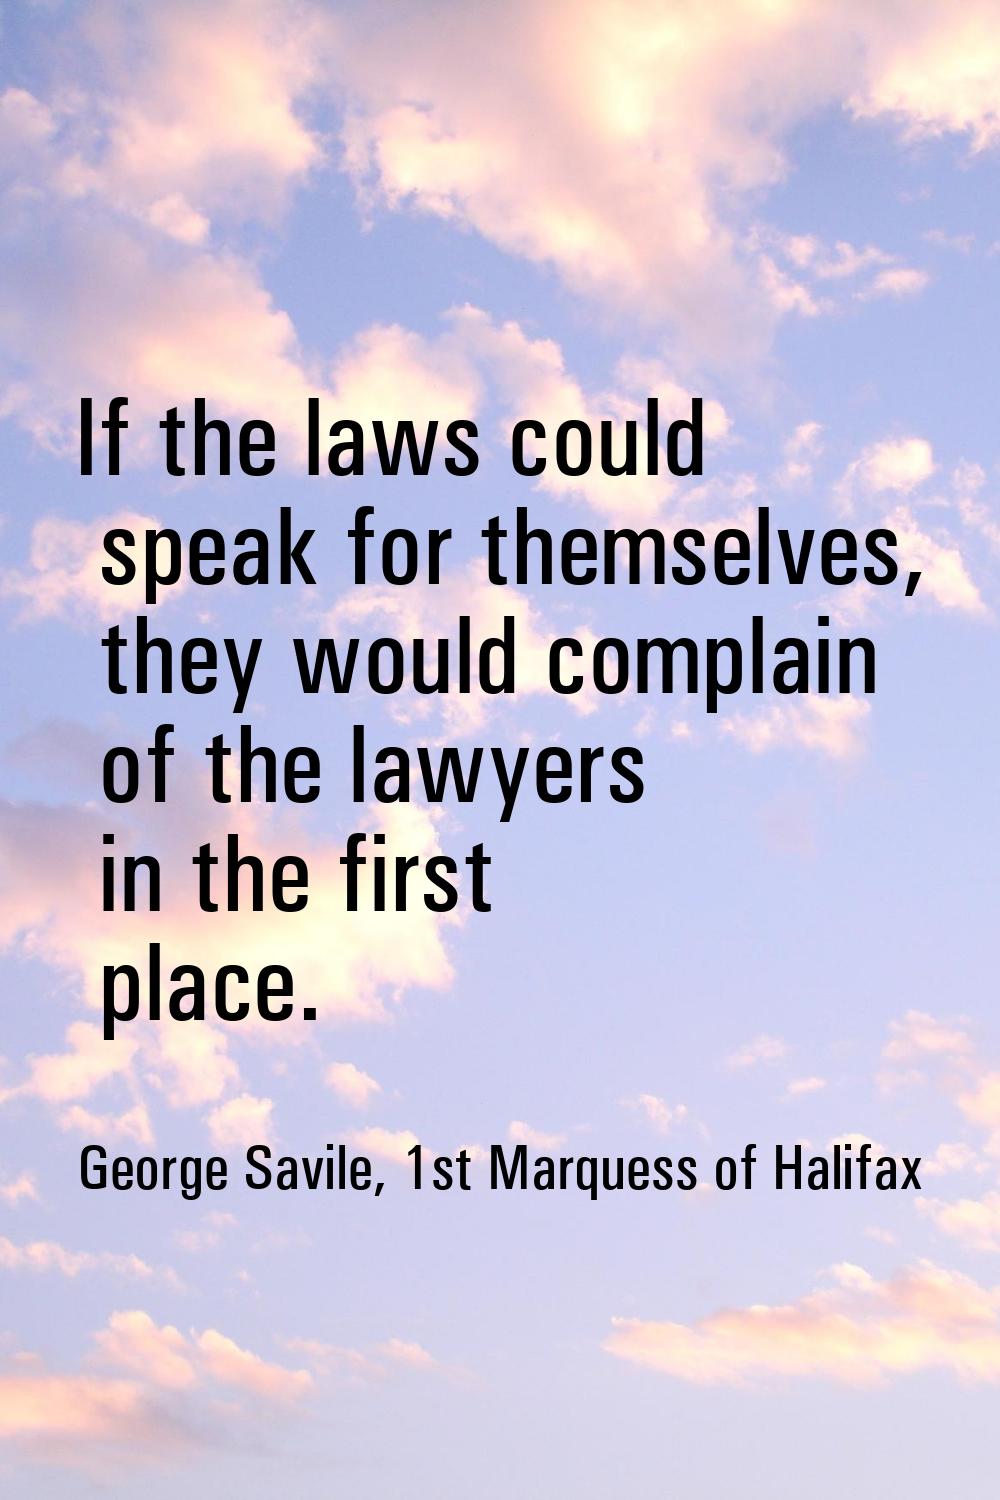 If the laws could speak for themselves, they would complain of the lawyers in the first place.